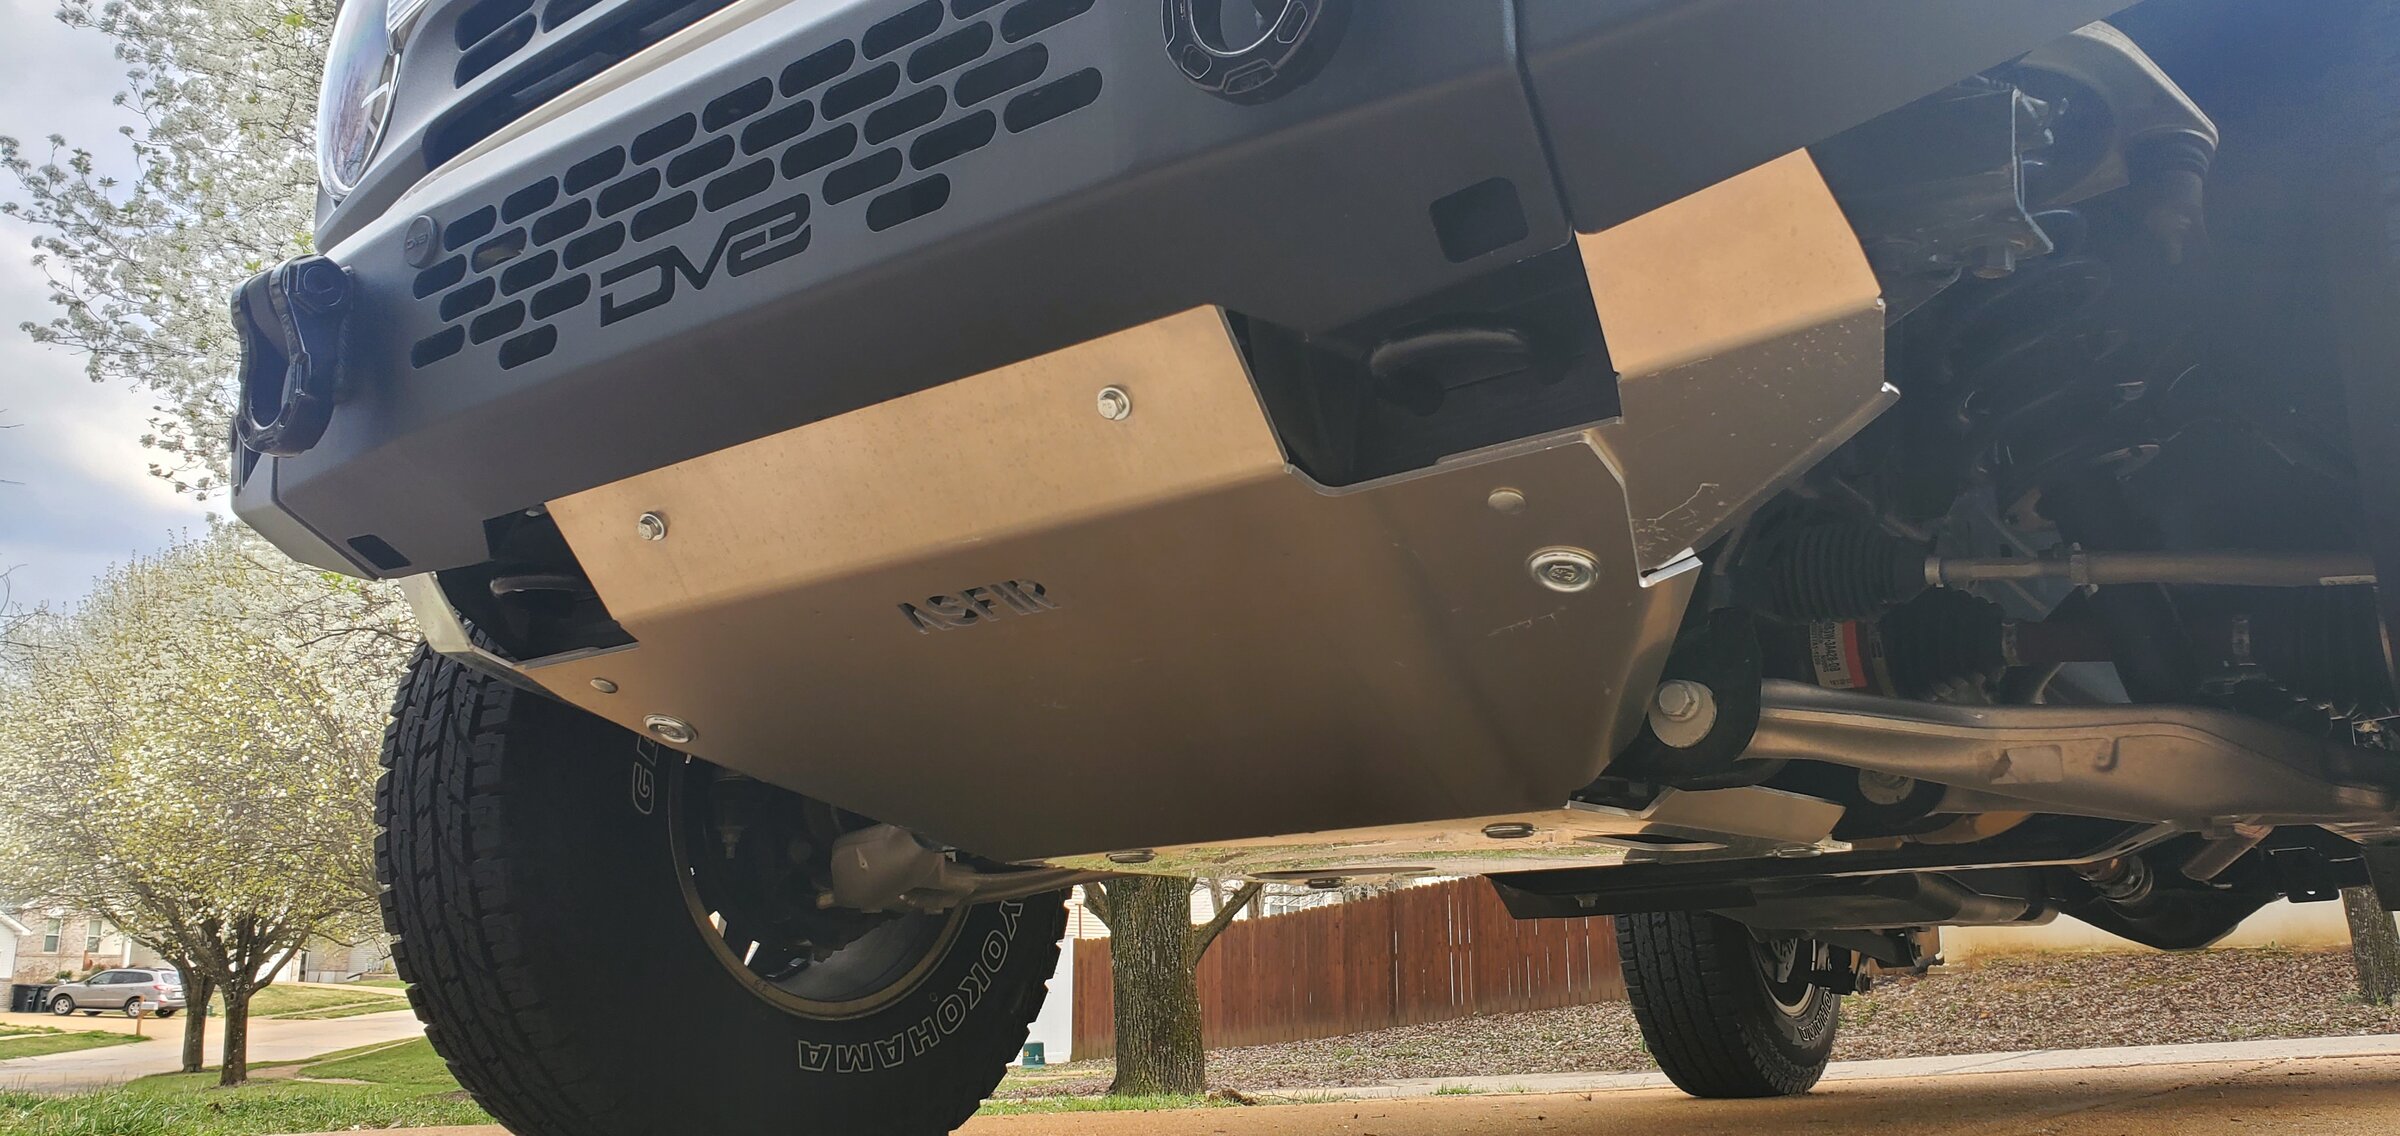 Ford Bronco Underbody aluminum skidplates and protection by ASFIR 4x4 WhatsApp Image 2022-04-11 at 8.50.04 PM